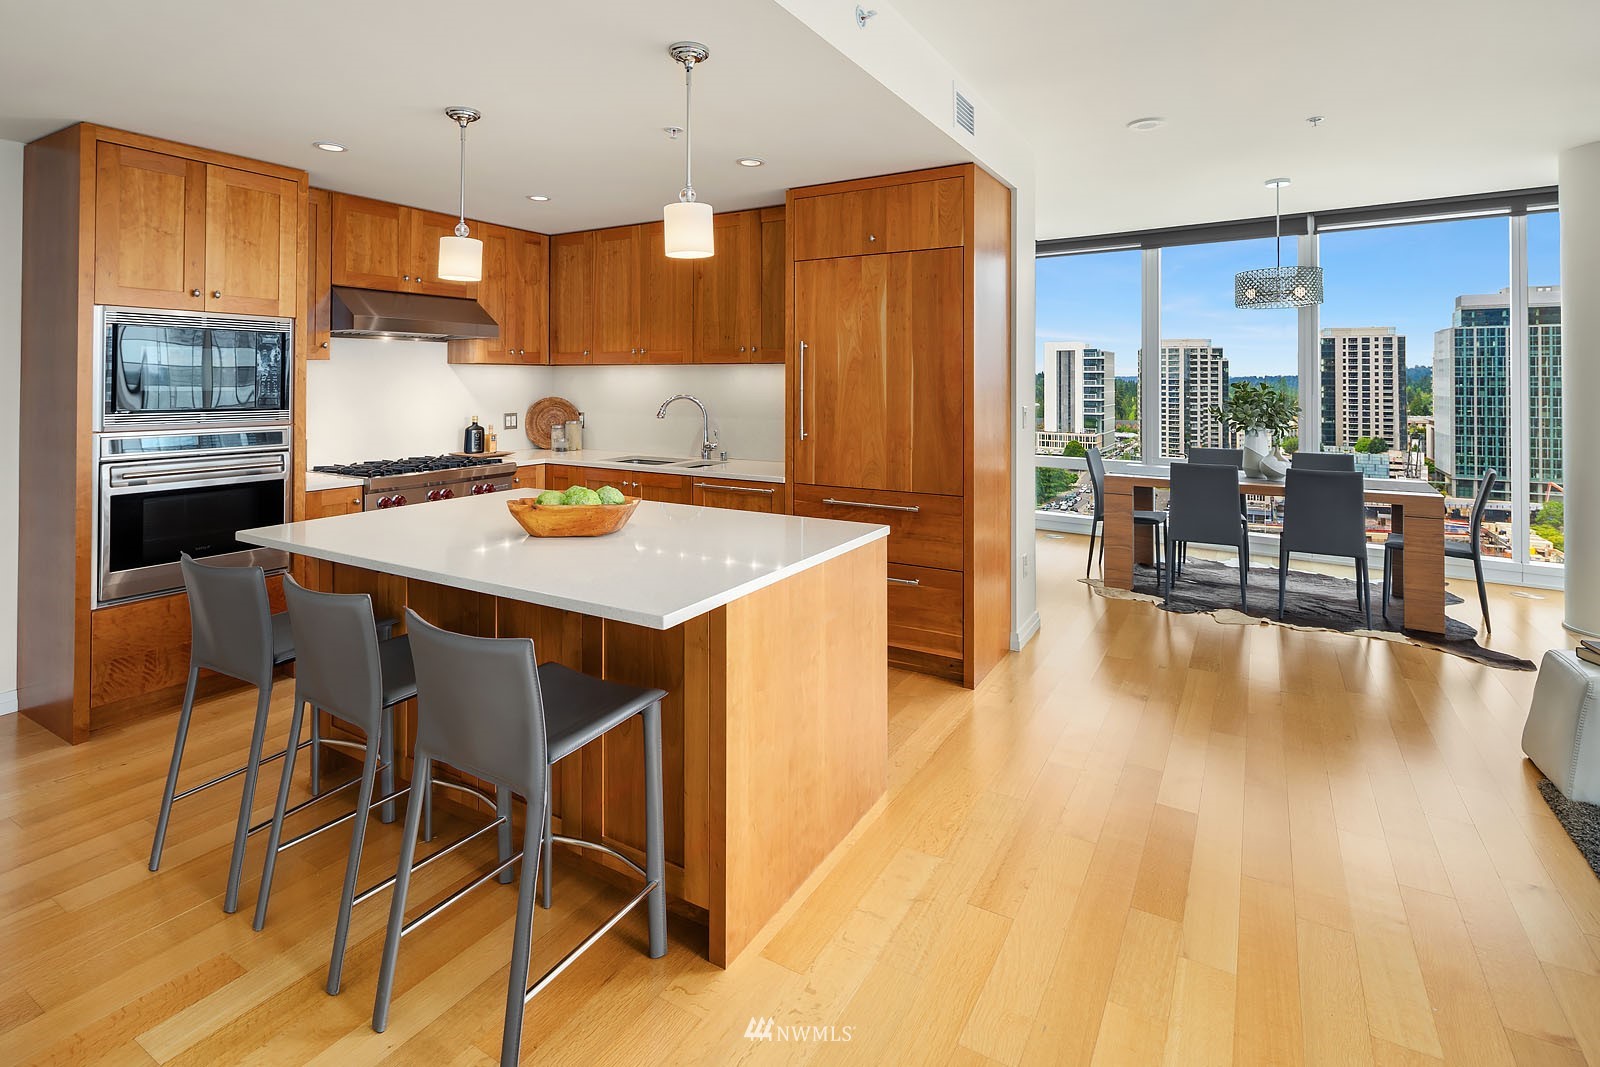 a kitchen with stainless steel appliances granite countertop a stove a refrigerator a kitchen island a dining table and chairs with wooden floor